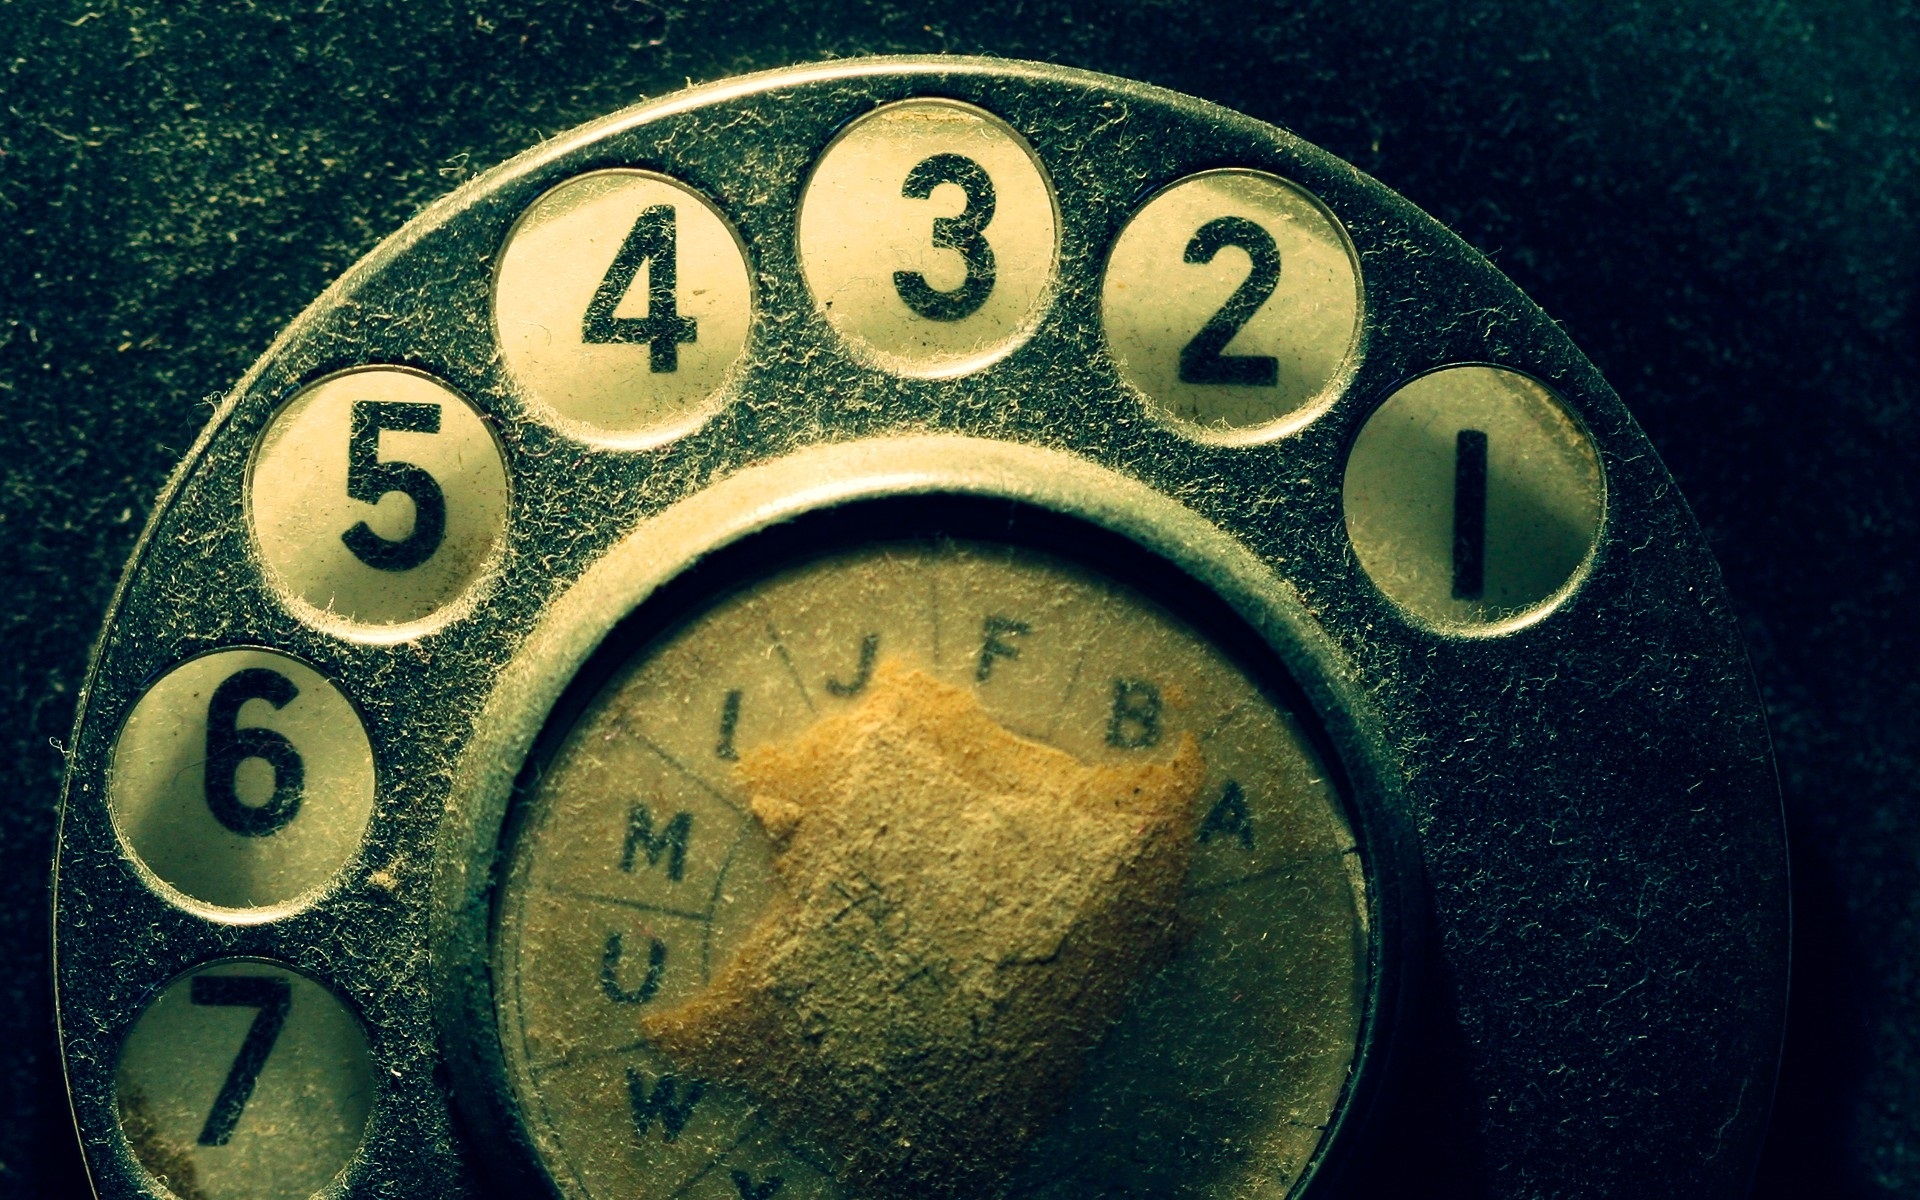 Wallpaper Old Telephone Dial, Dust - Old Telephone - HD Wallpaper 